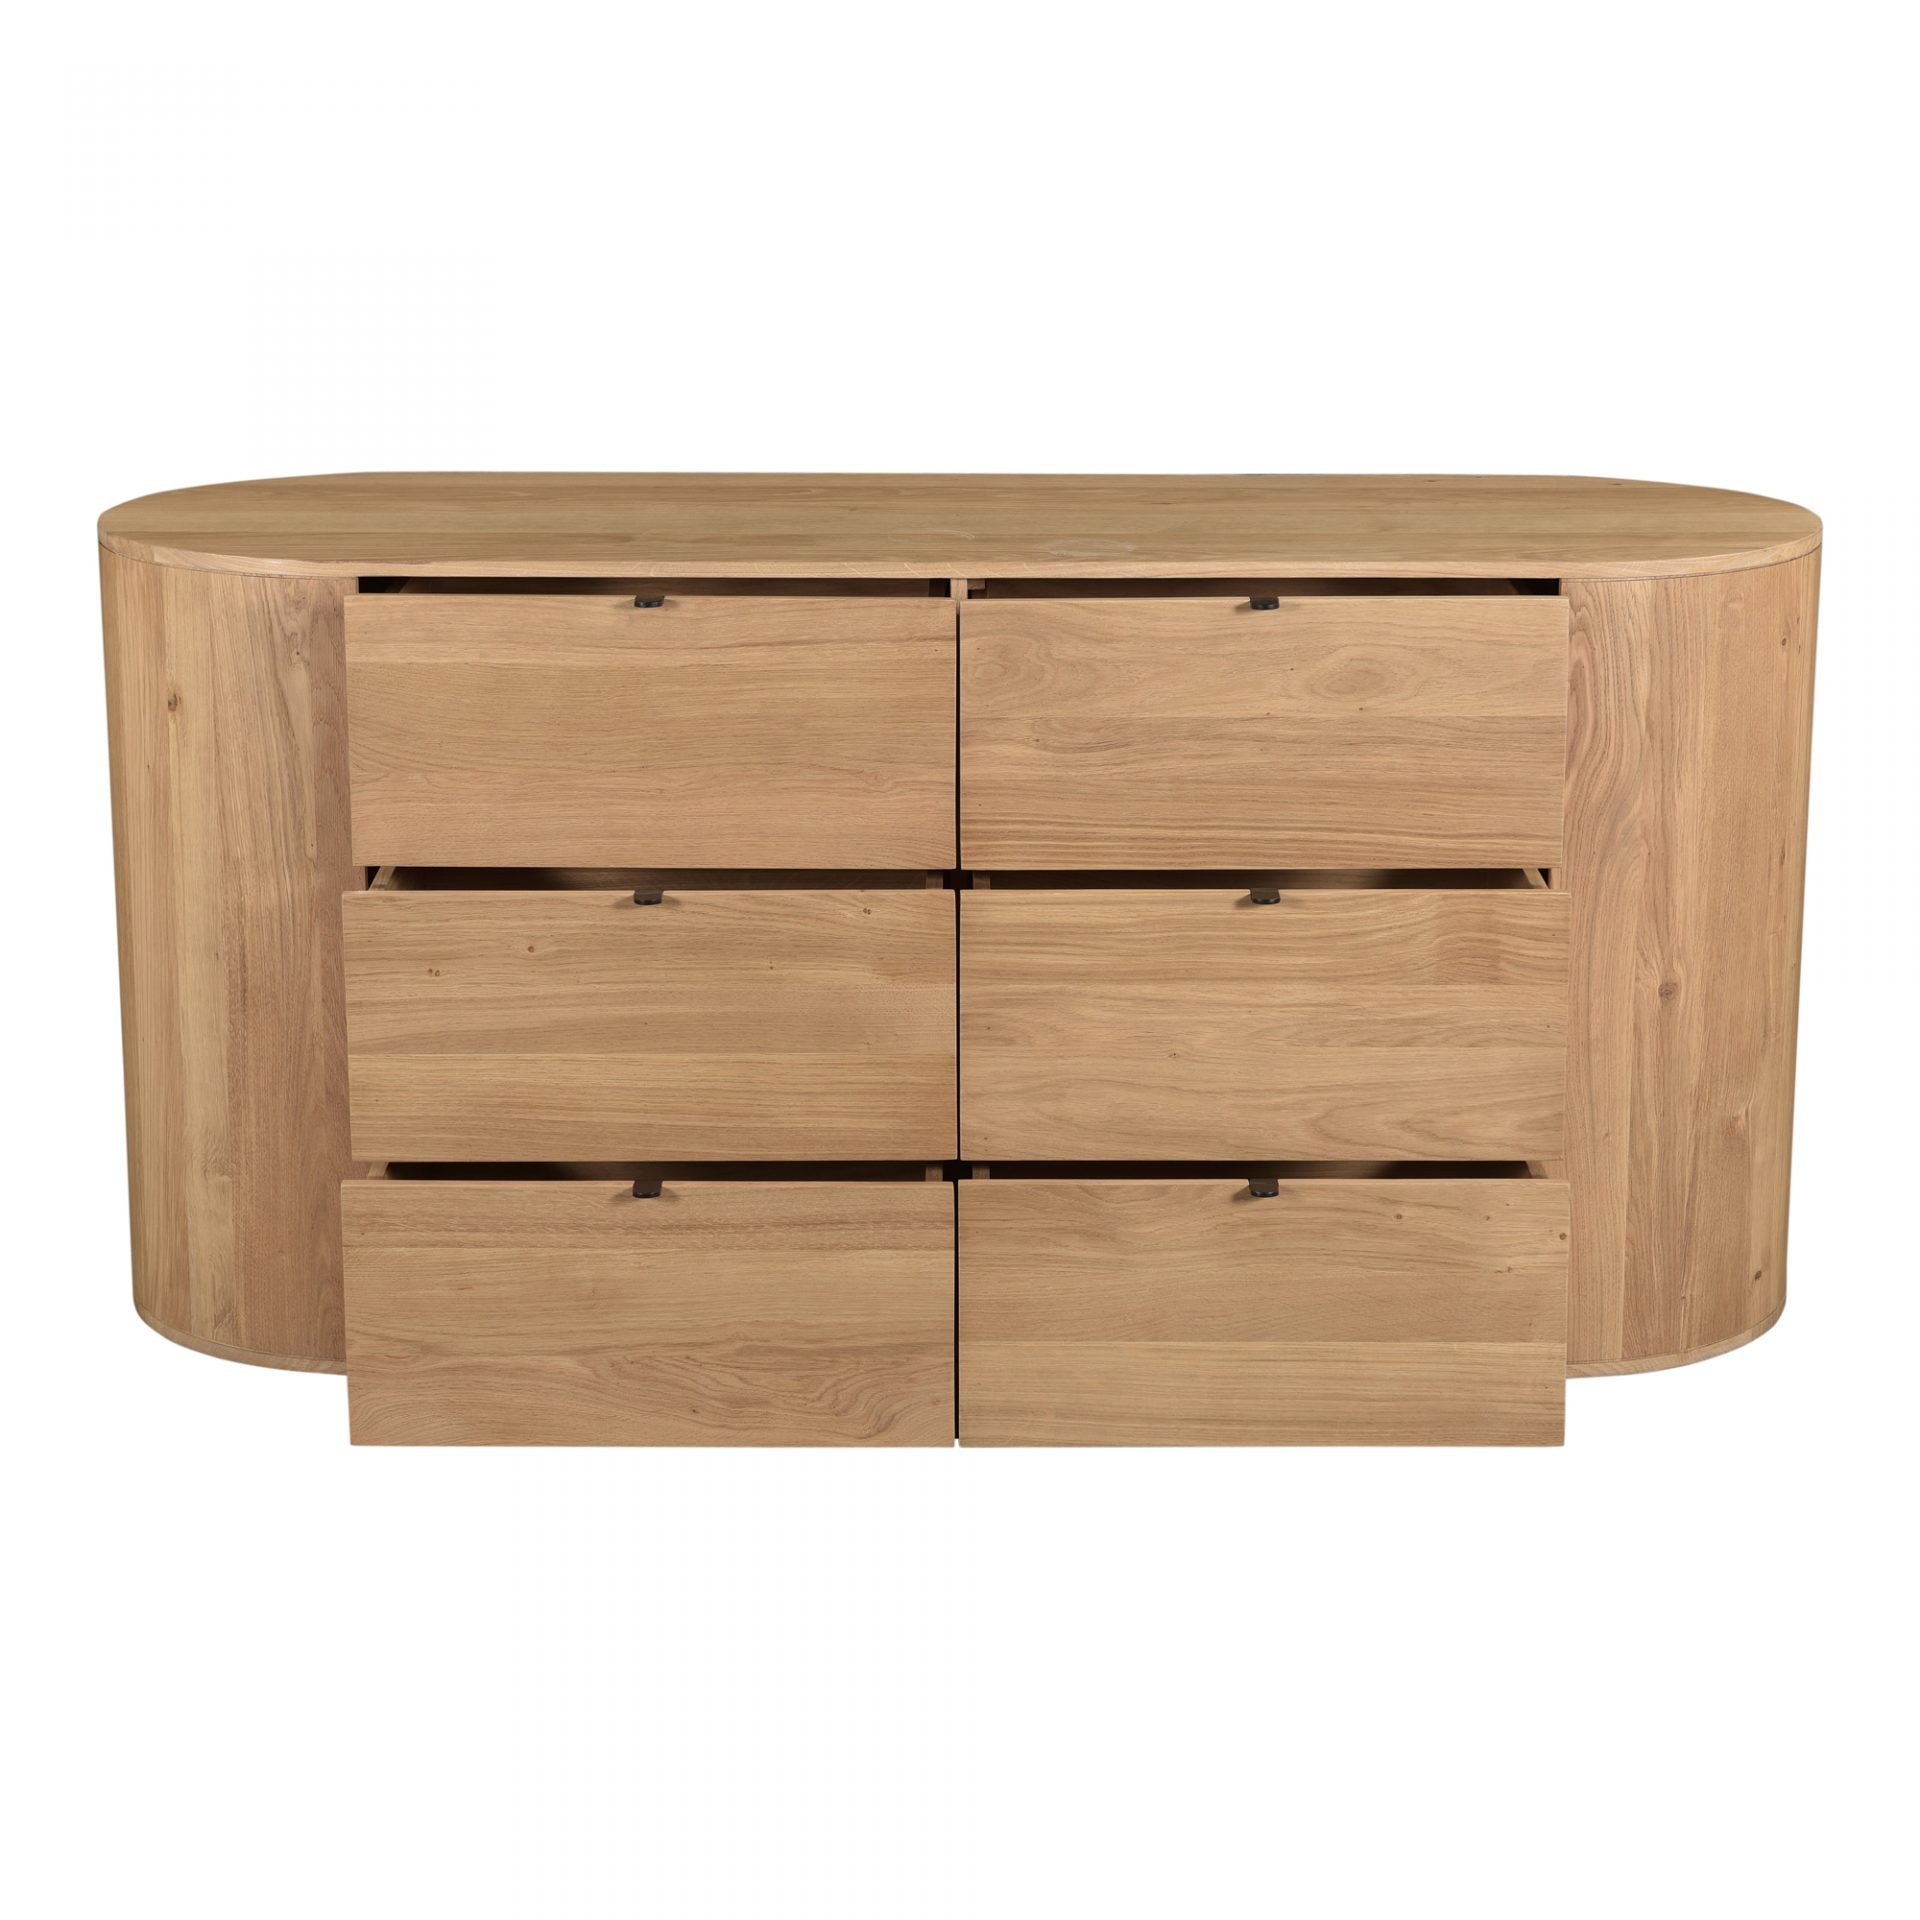 Crafted from solid oak with a natural semi-gloss finish, the Theo Dresser is a natural beauty. The six drawers are deep and soft-closing - the perfect combo for a bedroom dresser!  Size: 66"W x 22.5"D x 31.5"H Material: Solid Oak